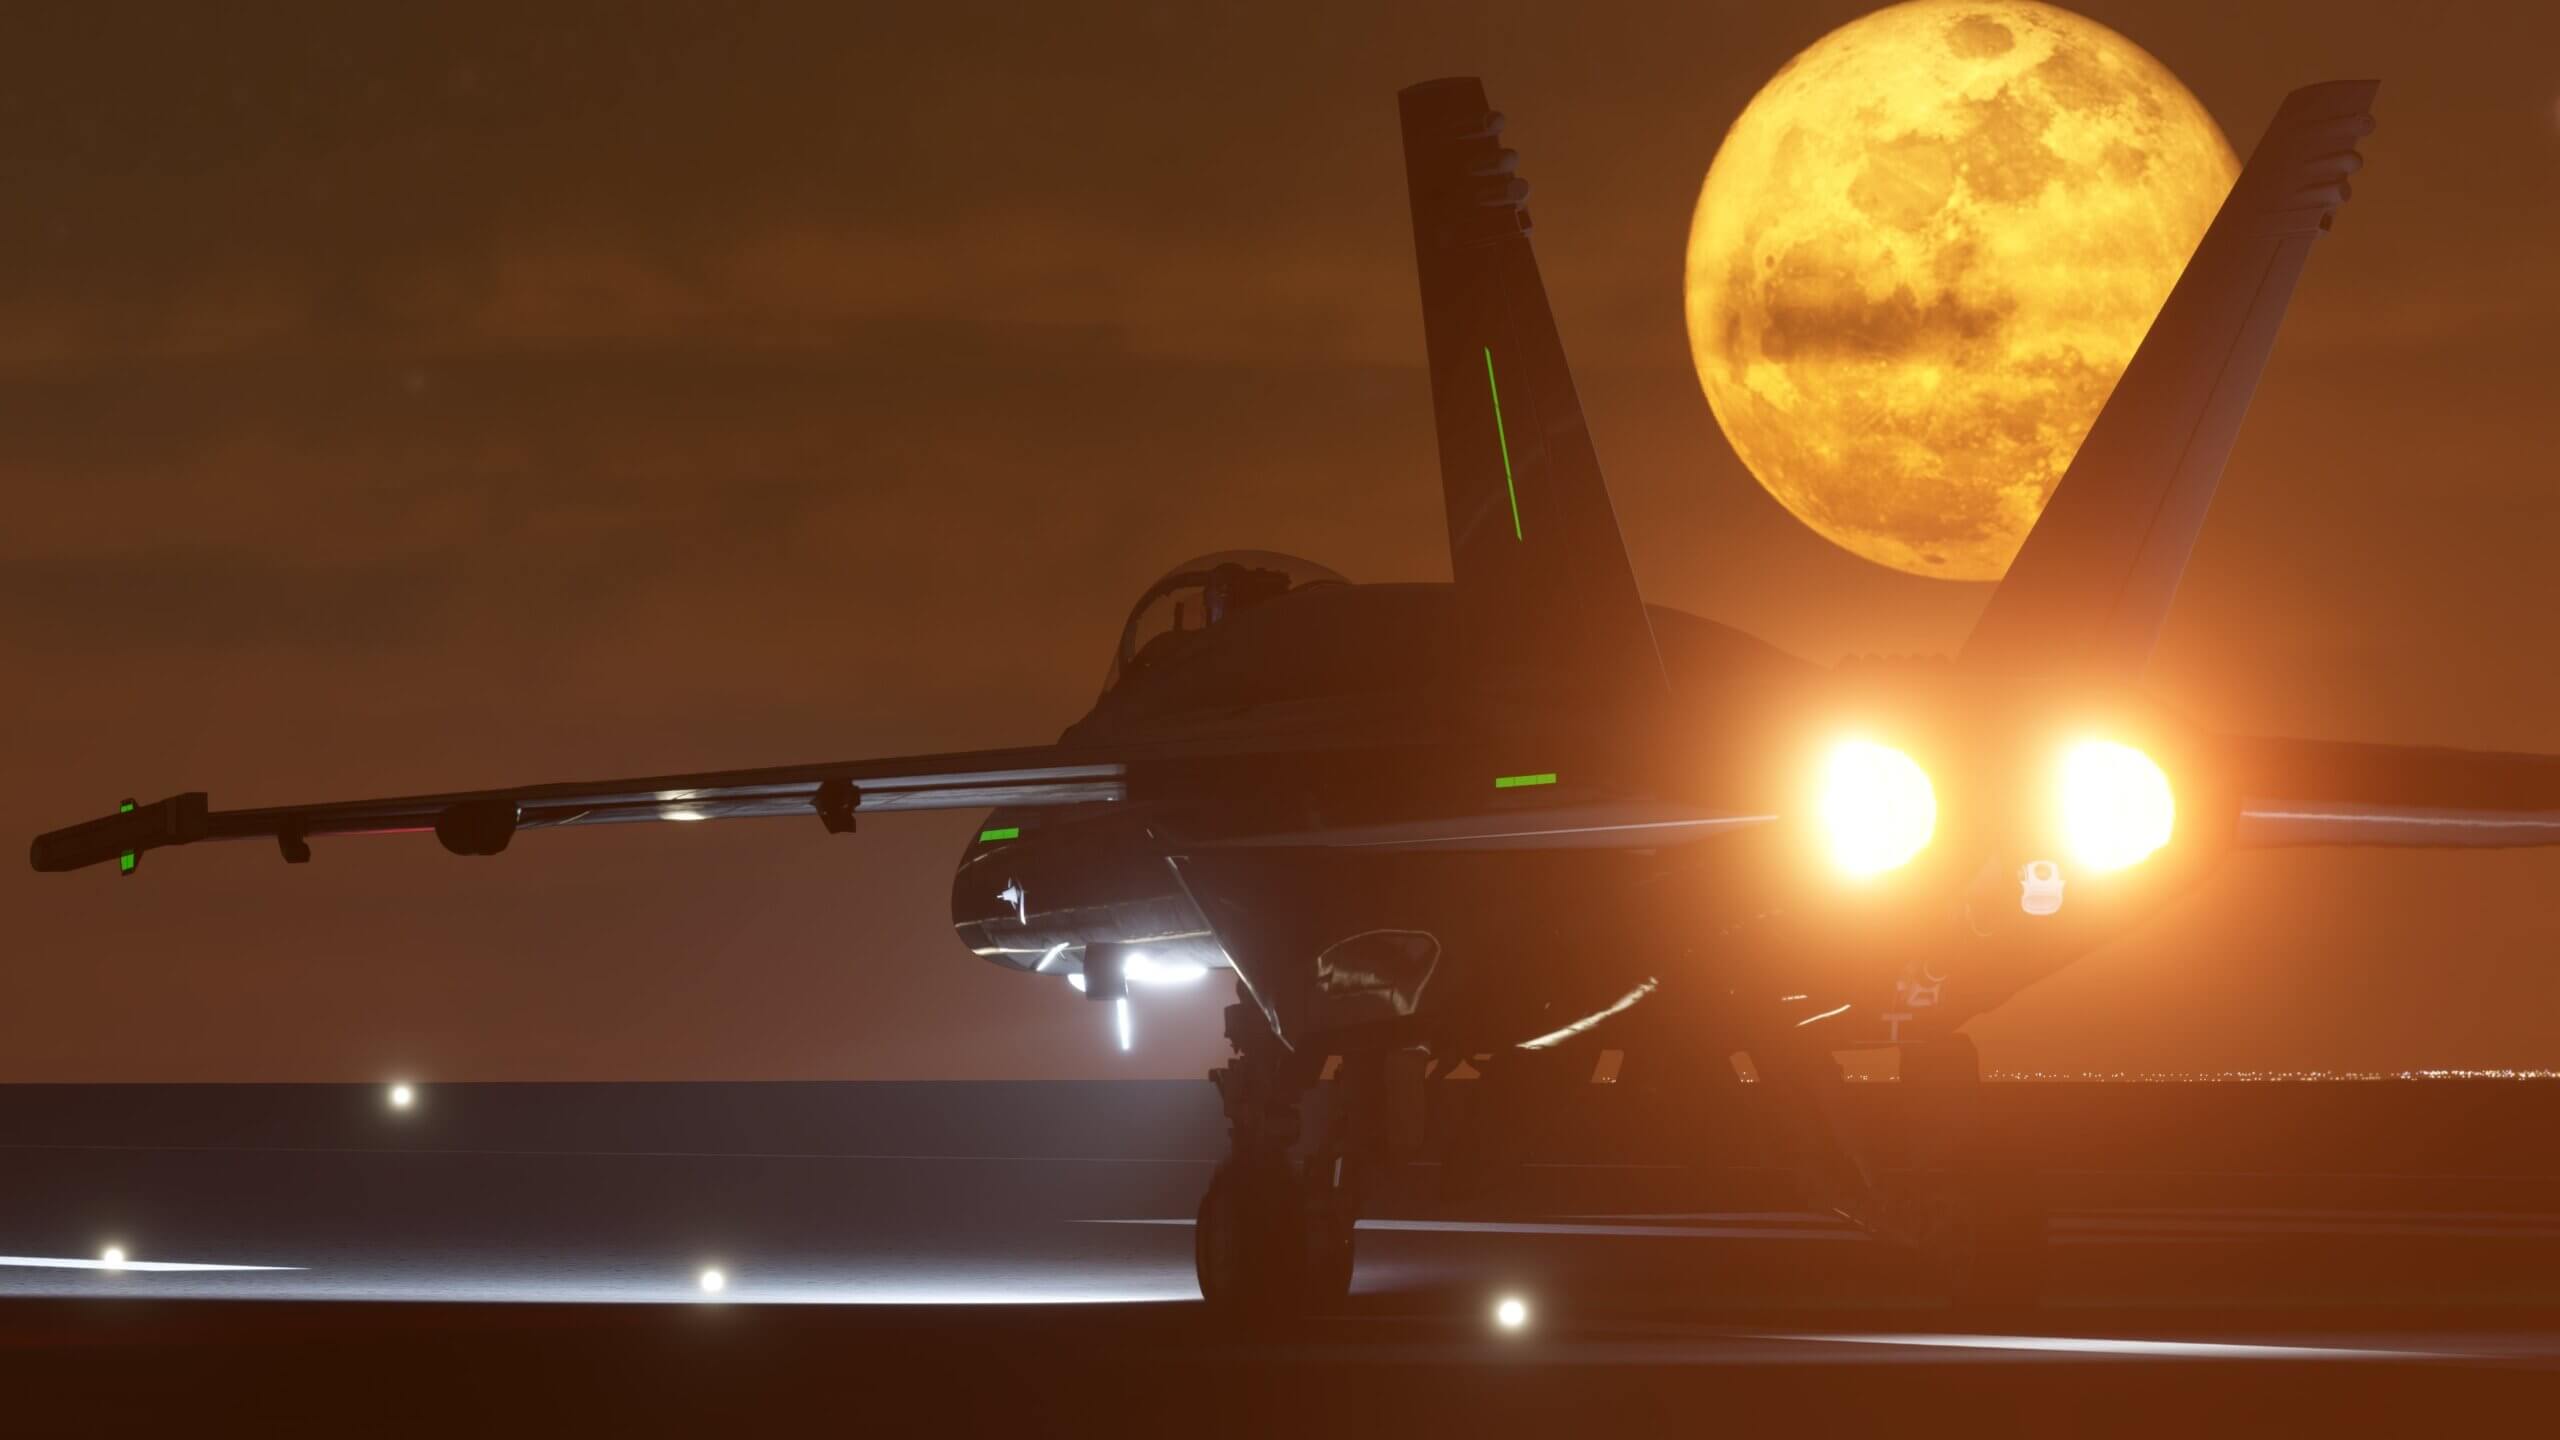 The F/A-18 Hornet lights its afterburners for takeoff from an aircraft carrier, with a full moon visible through the vertical stabilizers.